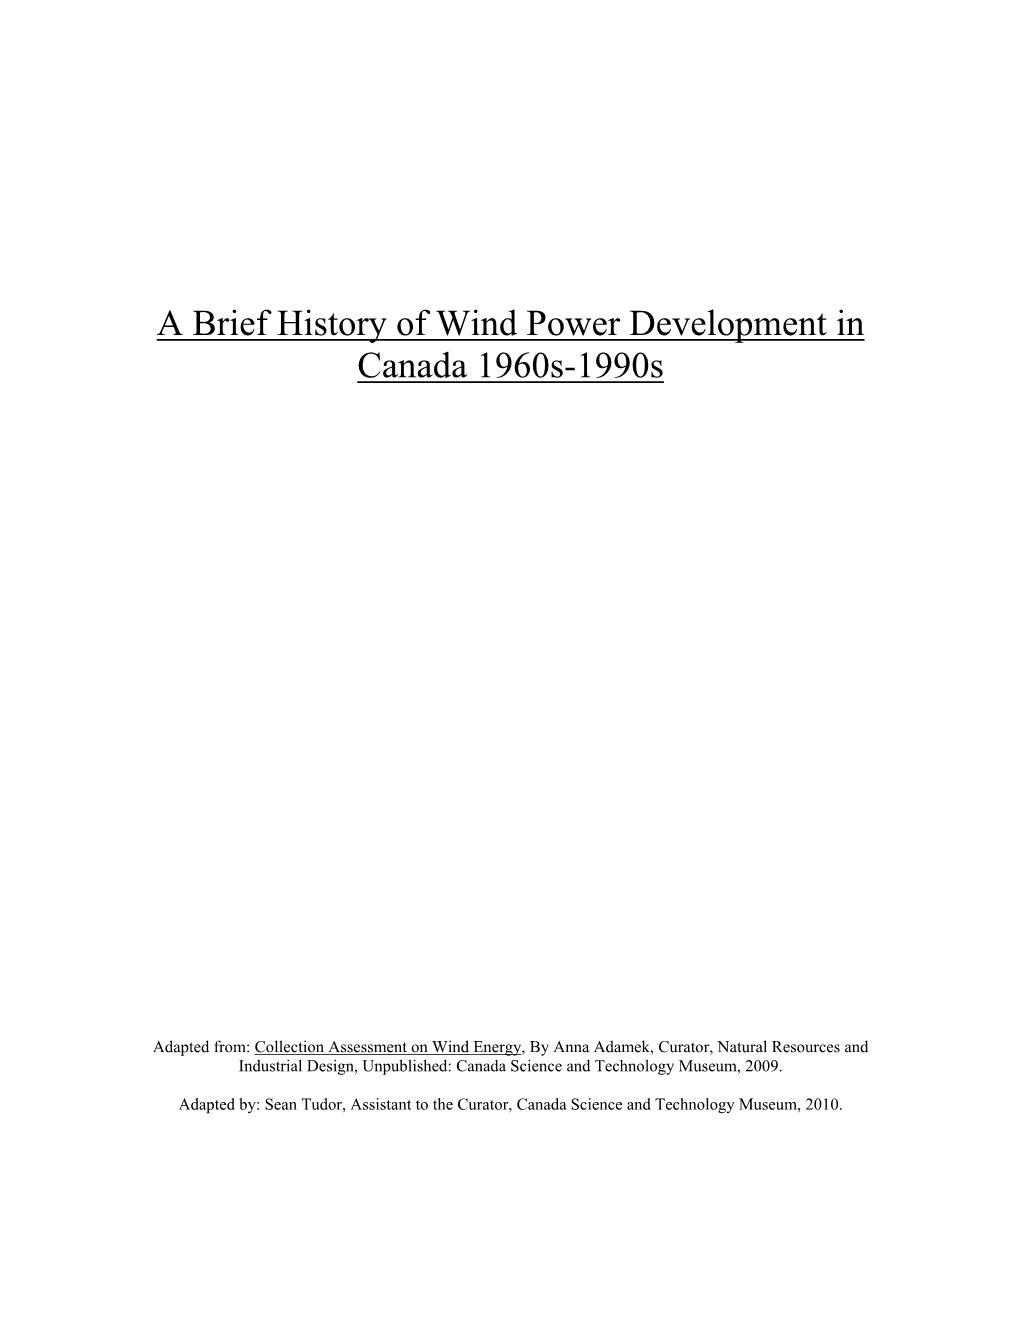 The Wind Power Has Been Harnessed for Centuries